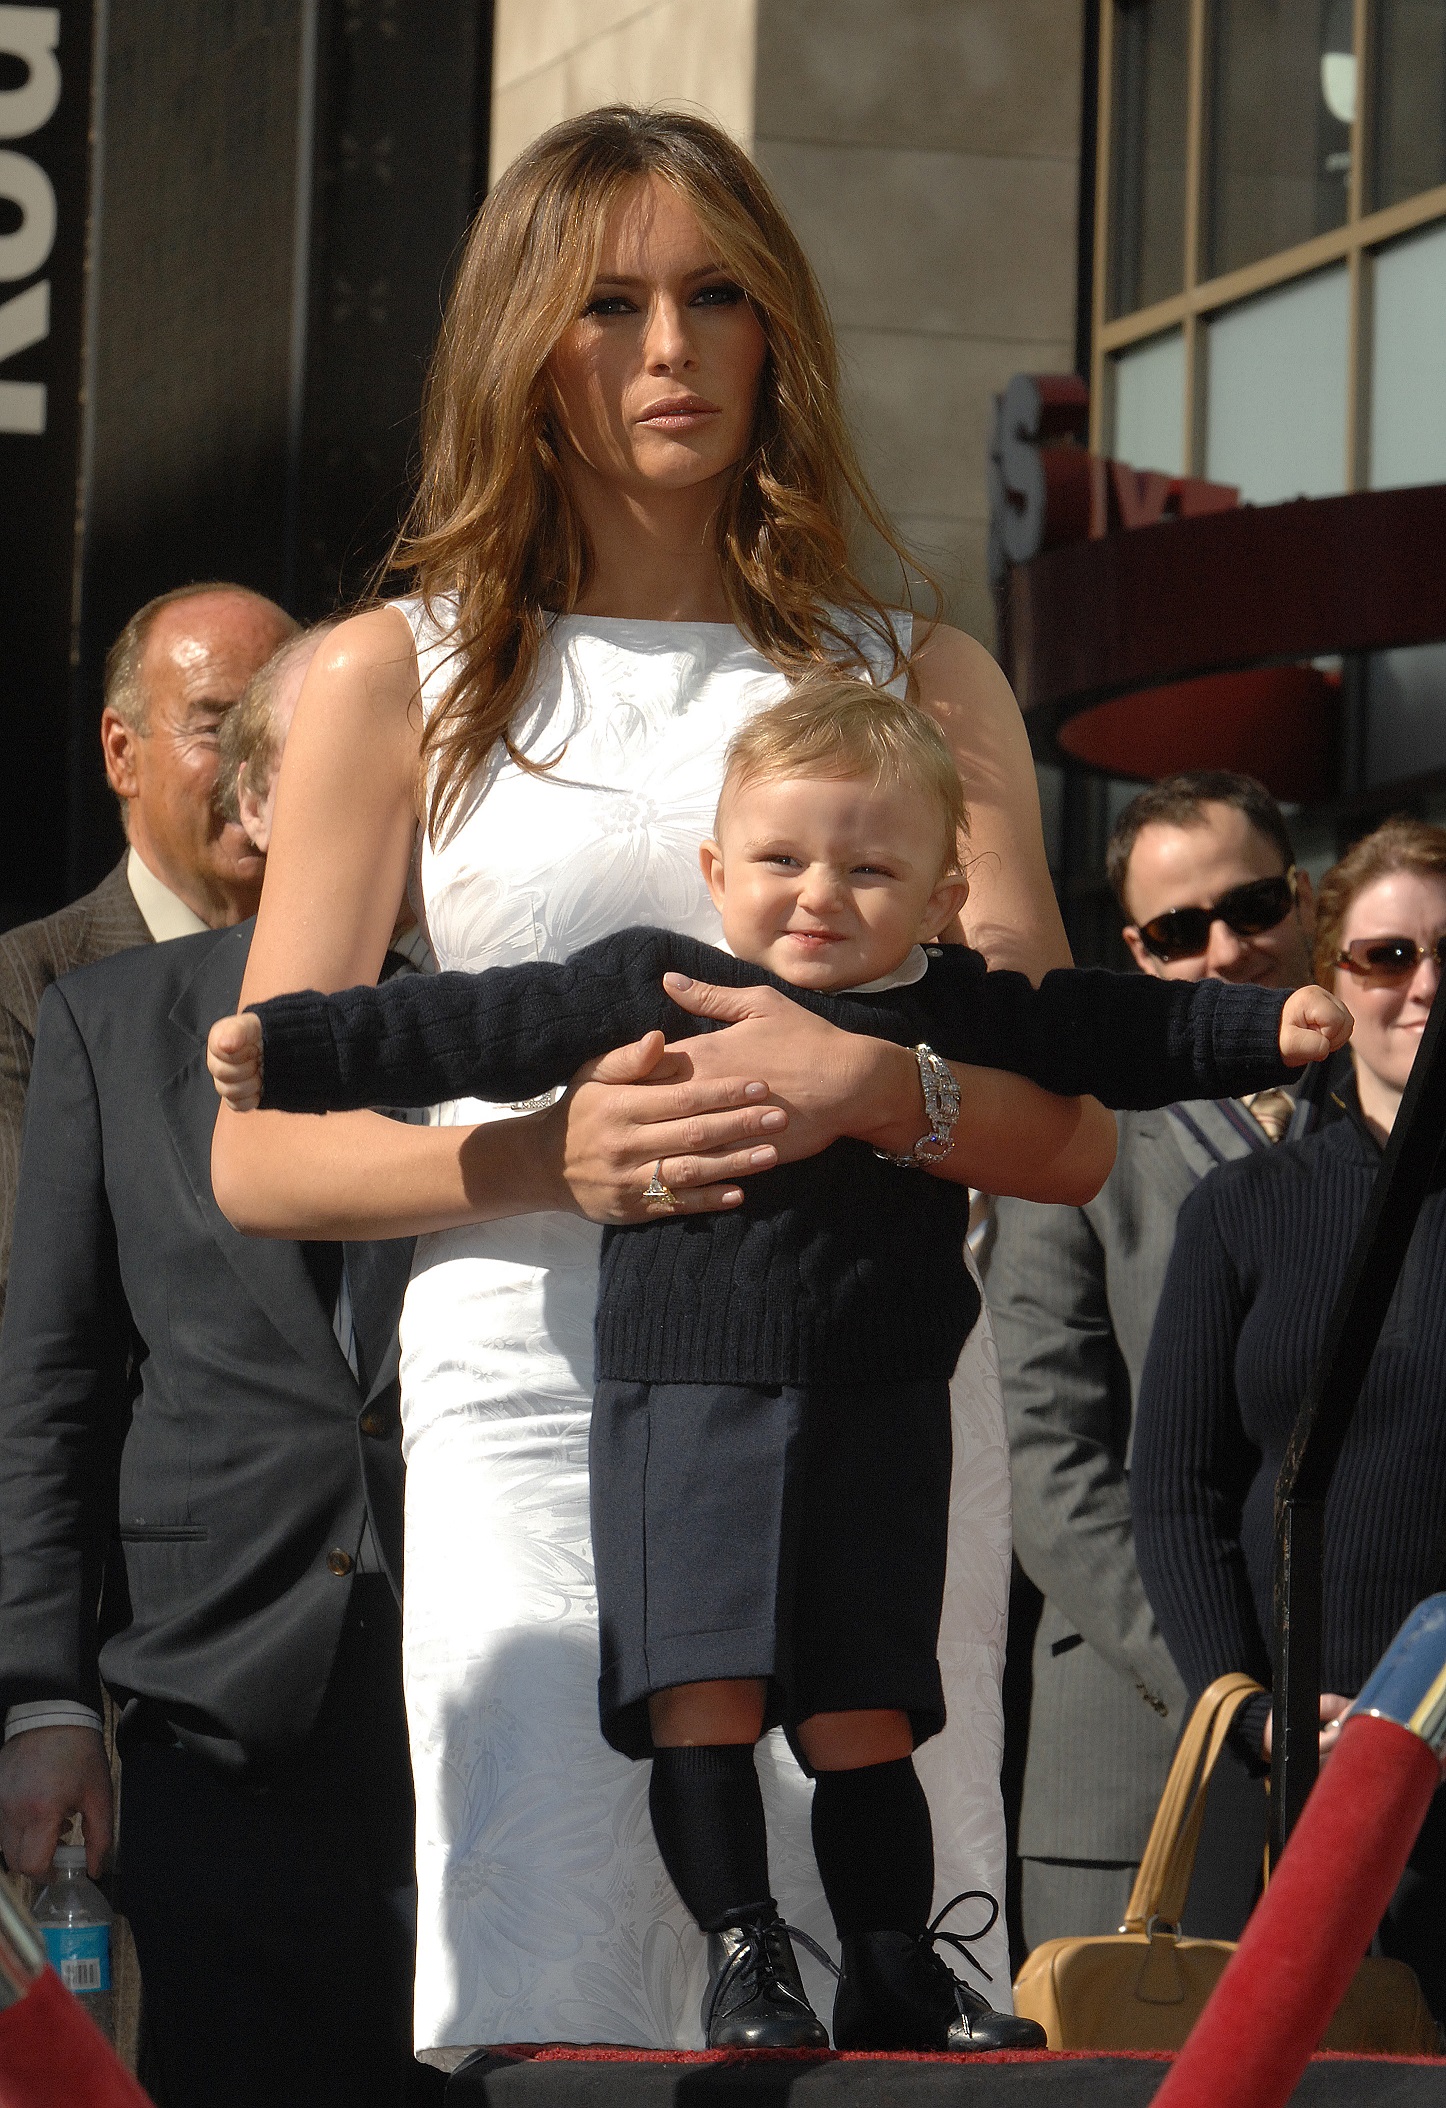 Melania Trump with baby son Barron Trump at the ceremony honoring her husband Donald Trump with a star on the Hollywood Walk of Fame. (Photo by Frank Trapper/Corbis via Getty Images)